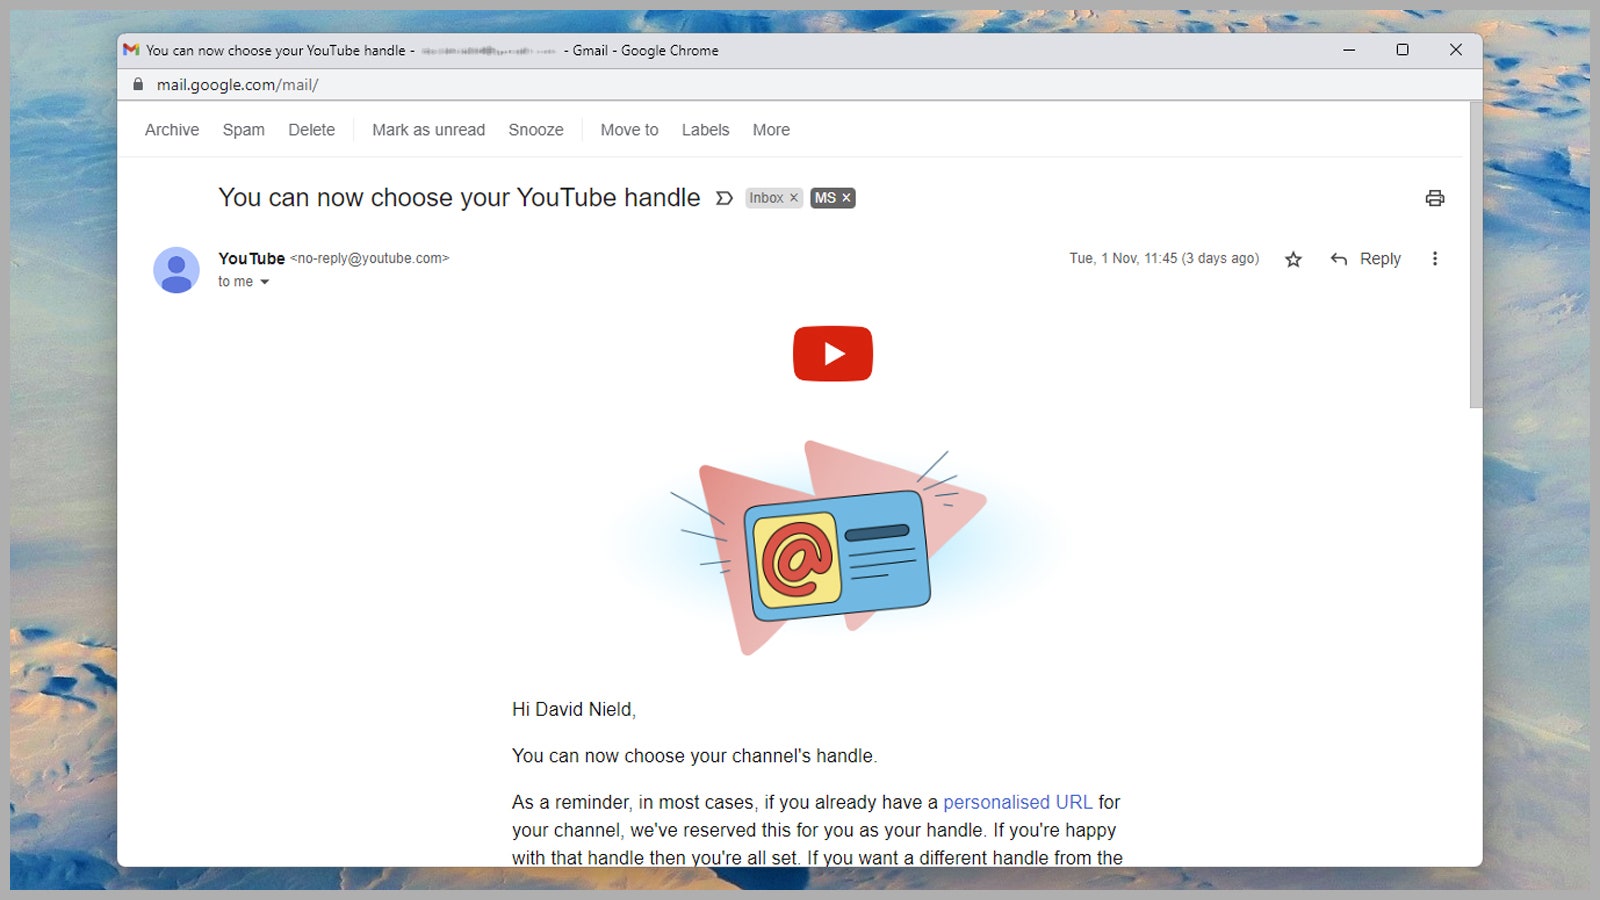 Screenshot on a desktop browser of an email from YouTube about claiming a YouTube handle.